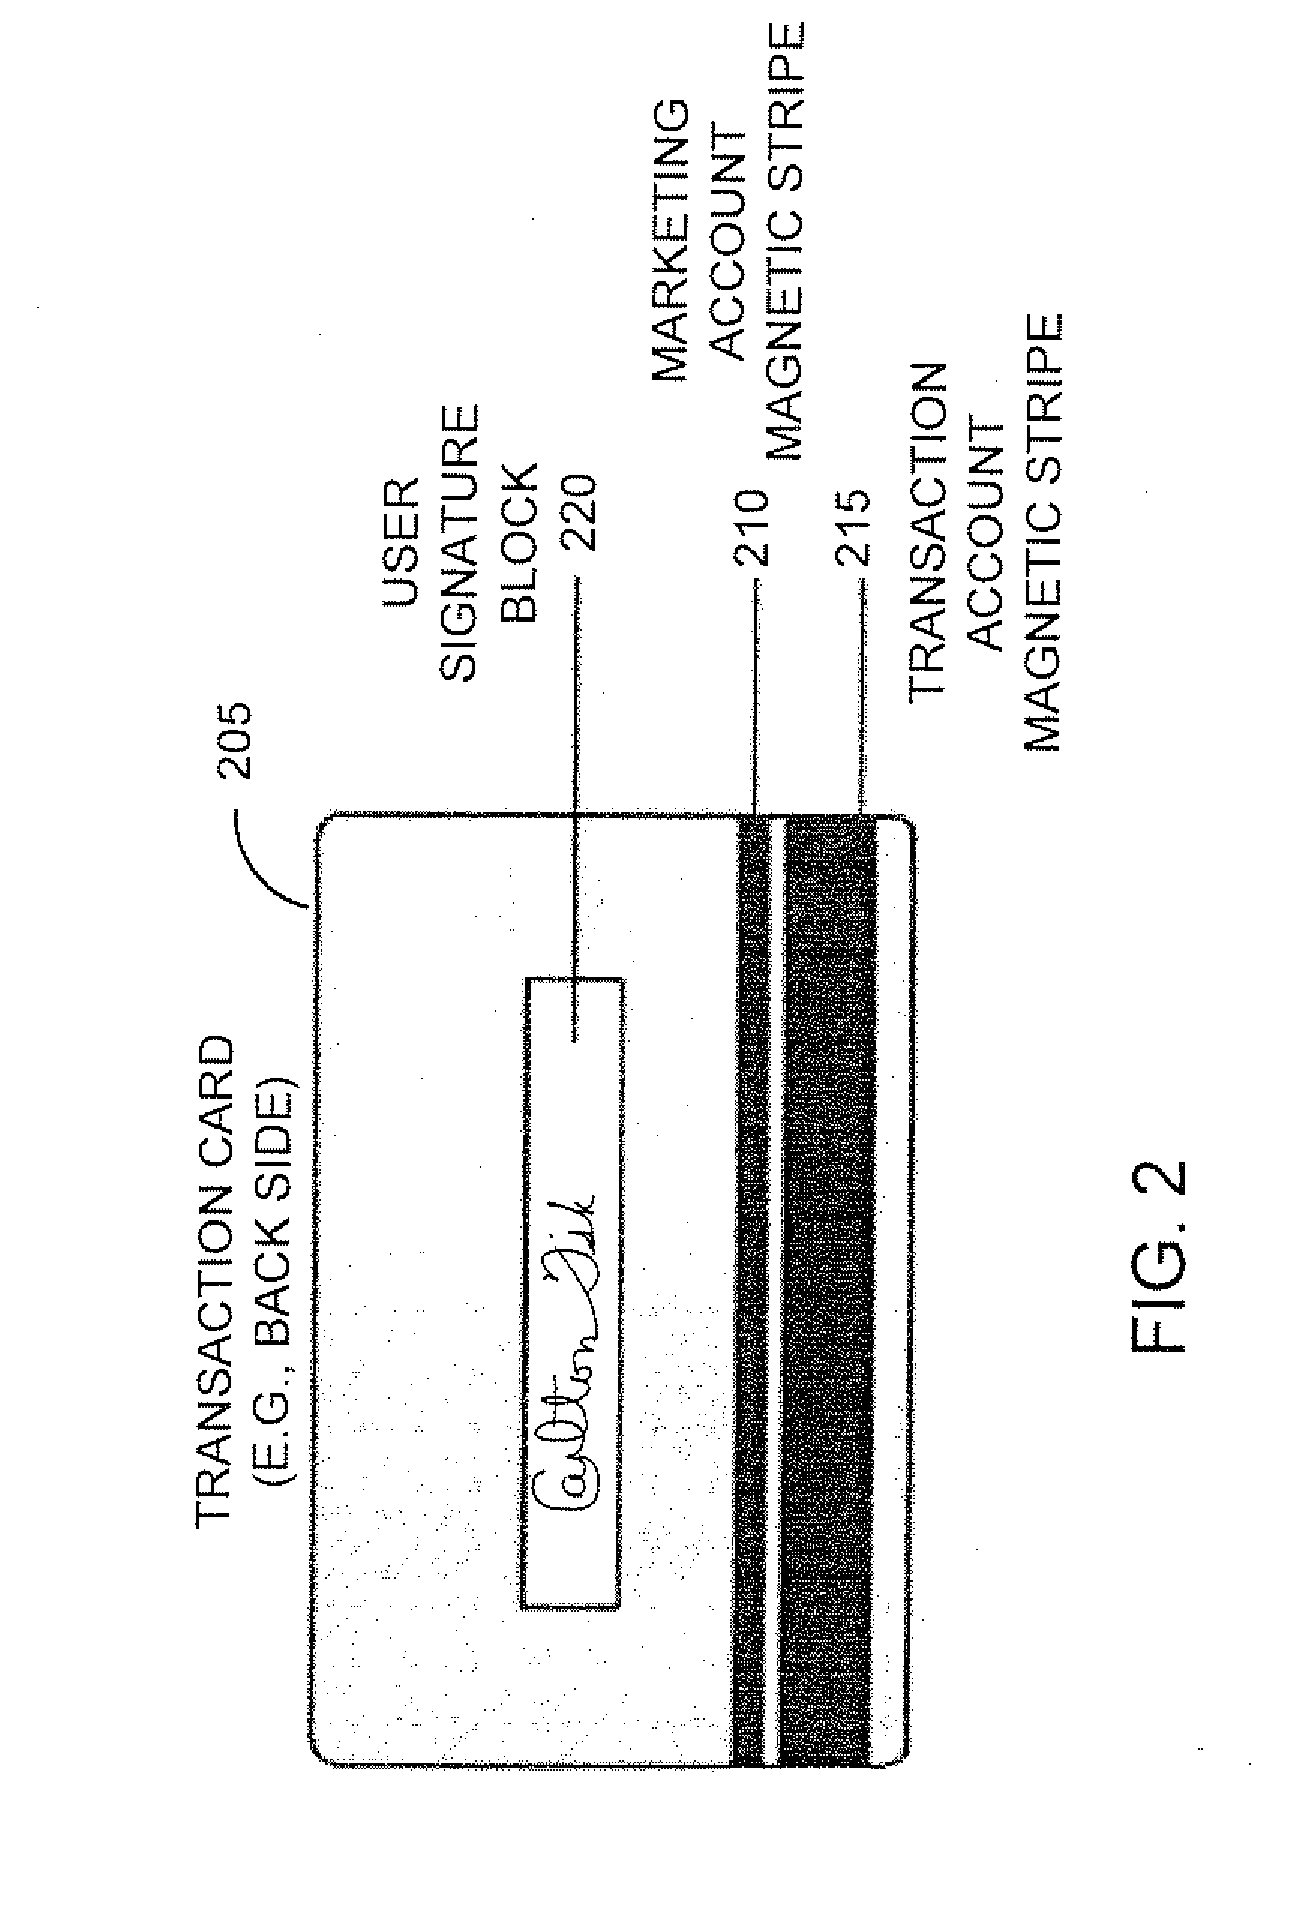 Method and Apparatus for Processing and Transmitting Demographic Data Based on Secondary Marketing Identifier in a Multi-Computer Environment